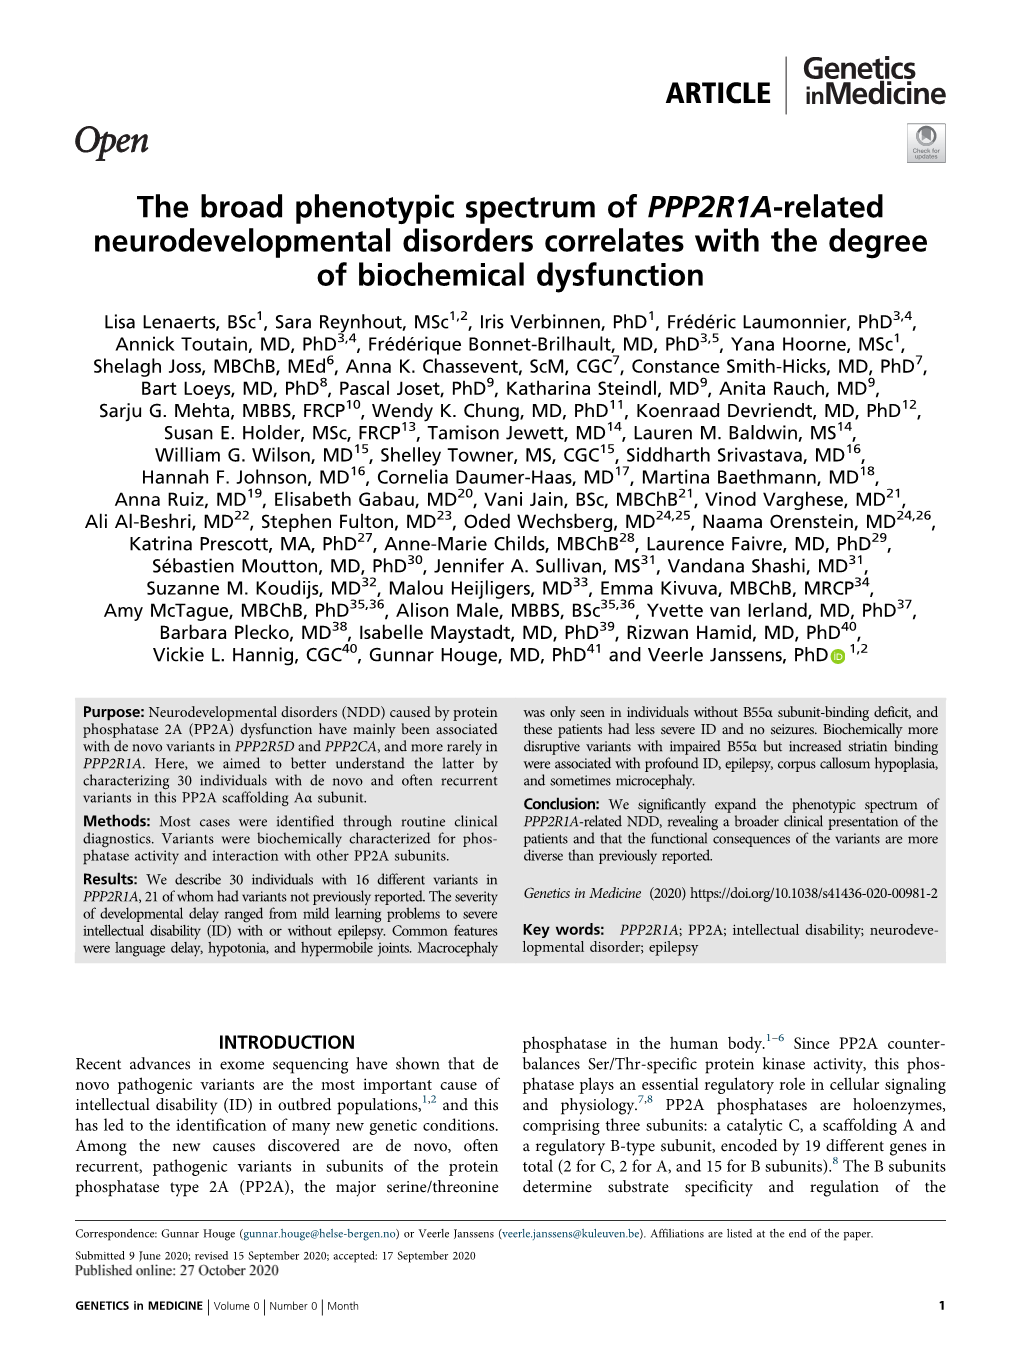 The Broad Phenotypic Spectrum of PPP2R1A-Related Neurodevelopmental Disorders Correlates with the Degree of Biochemical Dysfunction